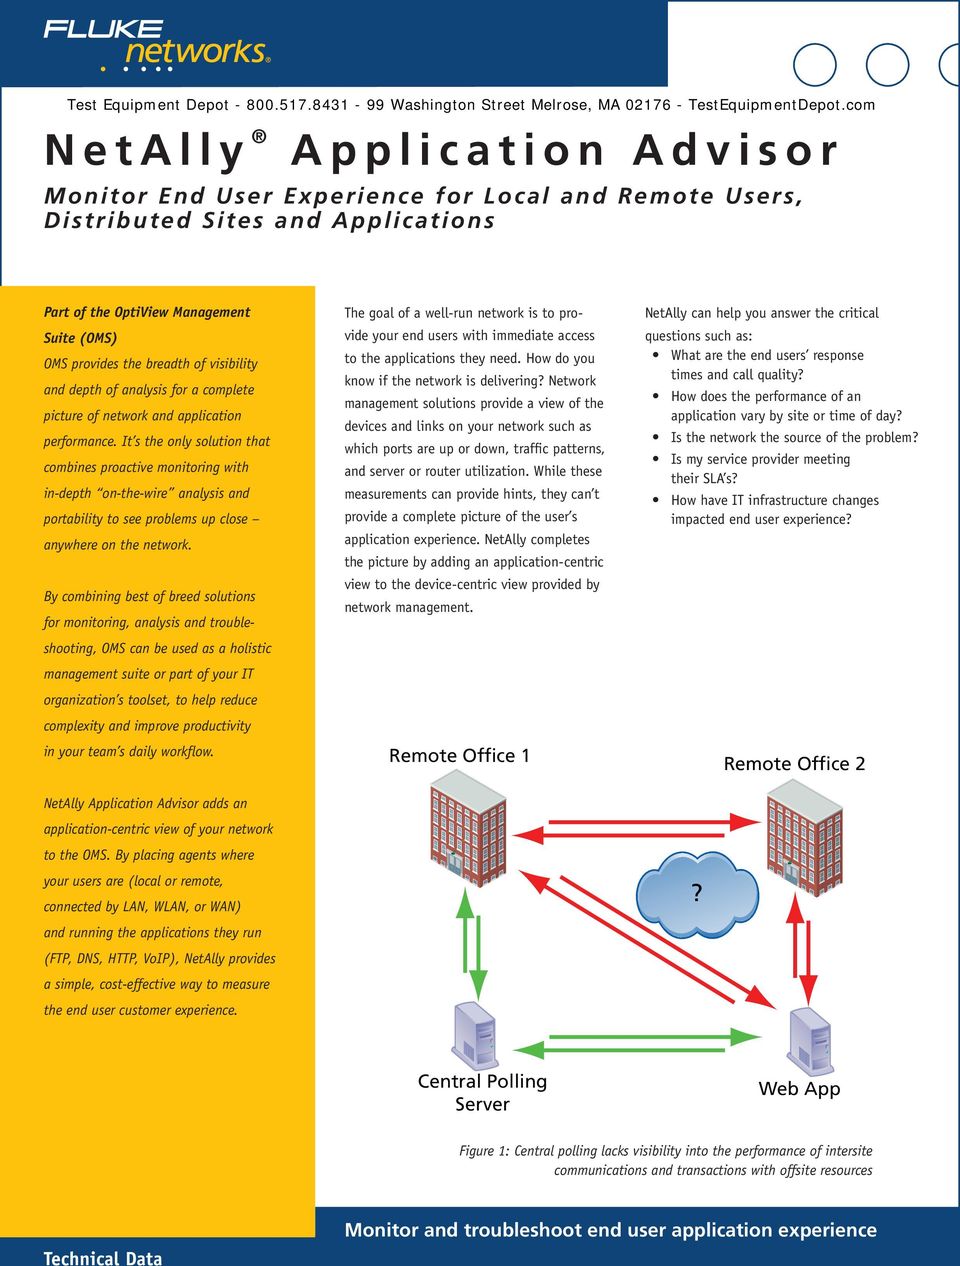 visibility and depth of analysis for a complete picture of network and application performance.